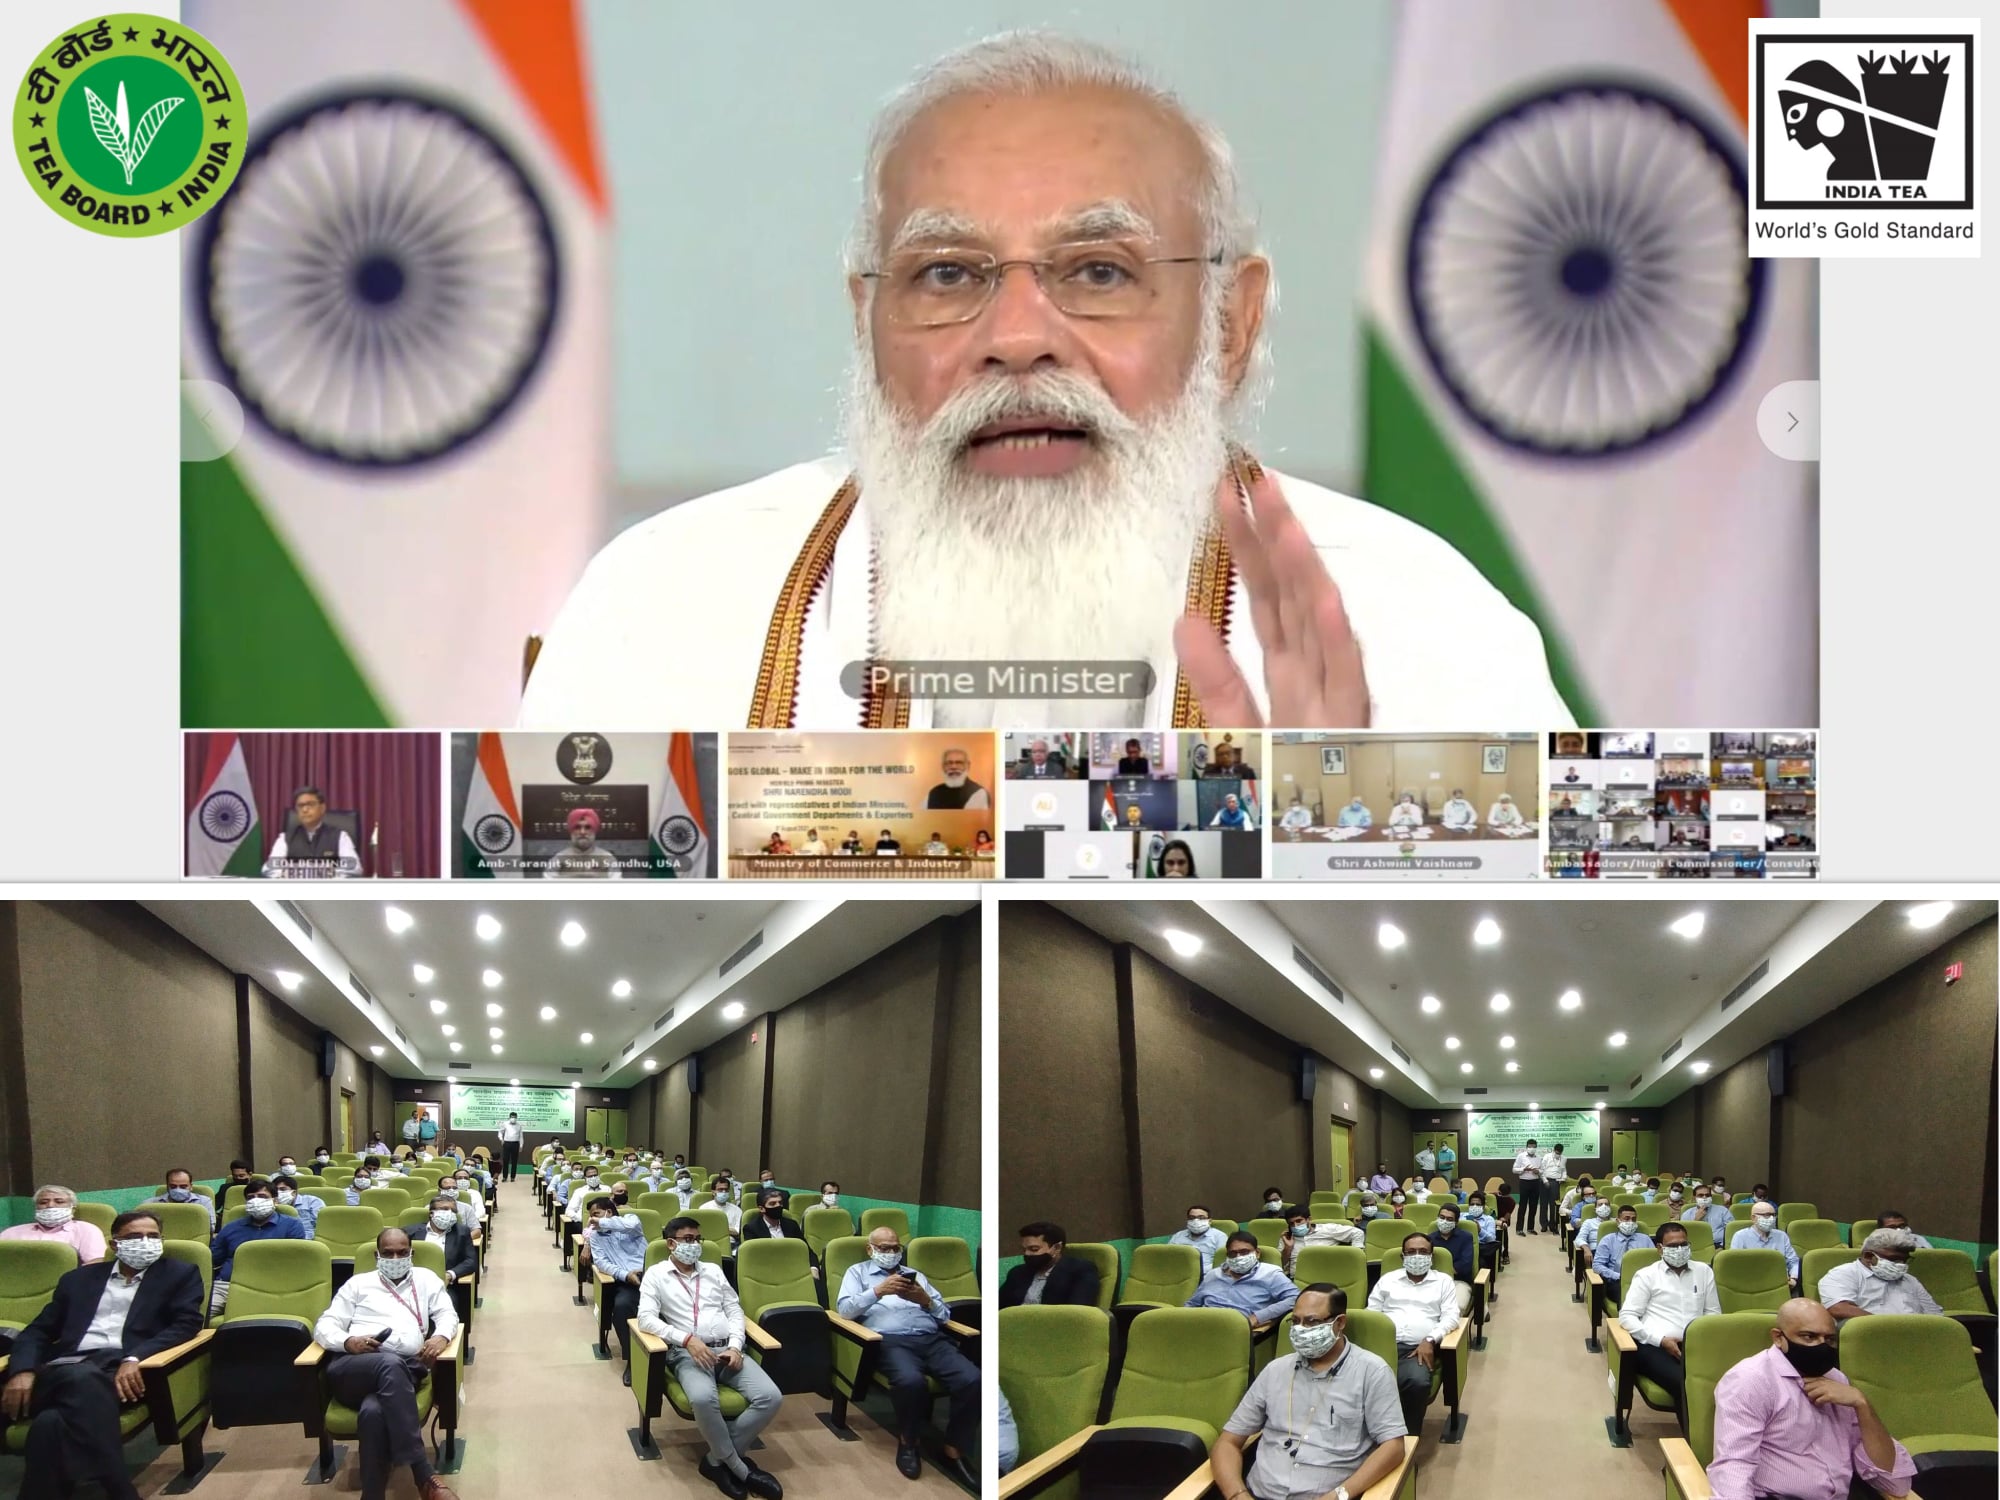 Hon'ble Prime Minister, Shri Narendra Modi interacted with Heads of Indian Missions abroad along with stakeholders of the trade and commerce sector on 06/08/2021. Stakeholders and officials of Indian tea industry attended the VC at Tea Board Head Office, Kolkata.